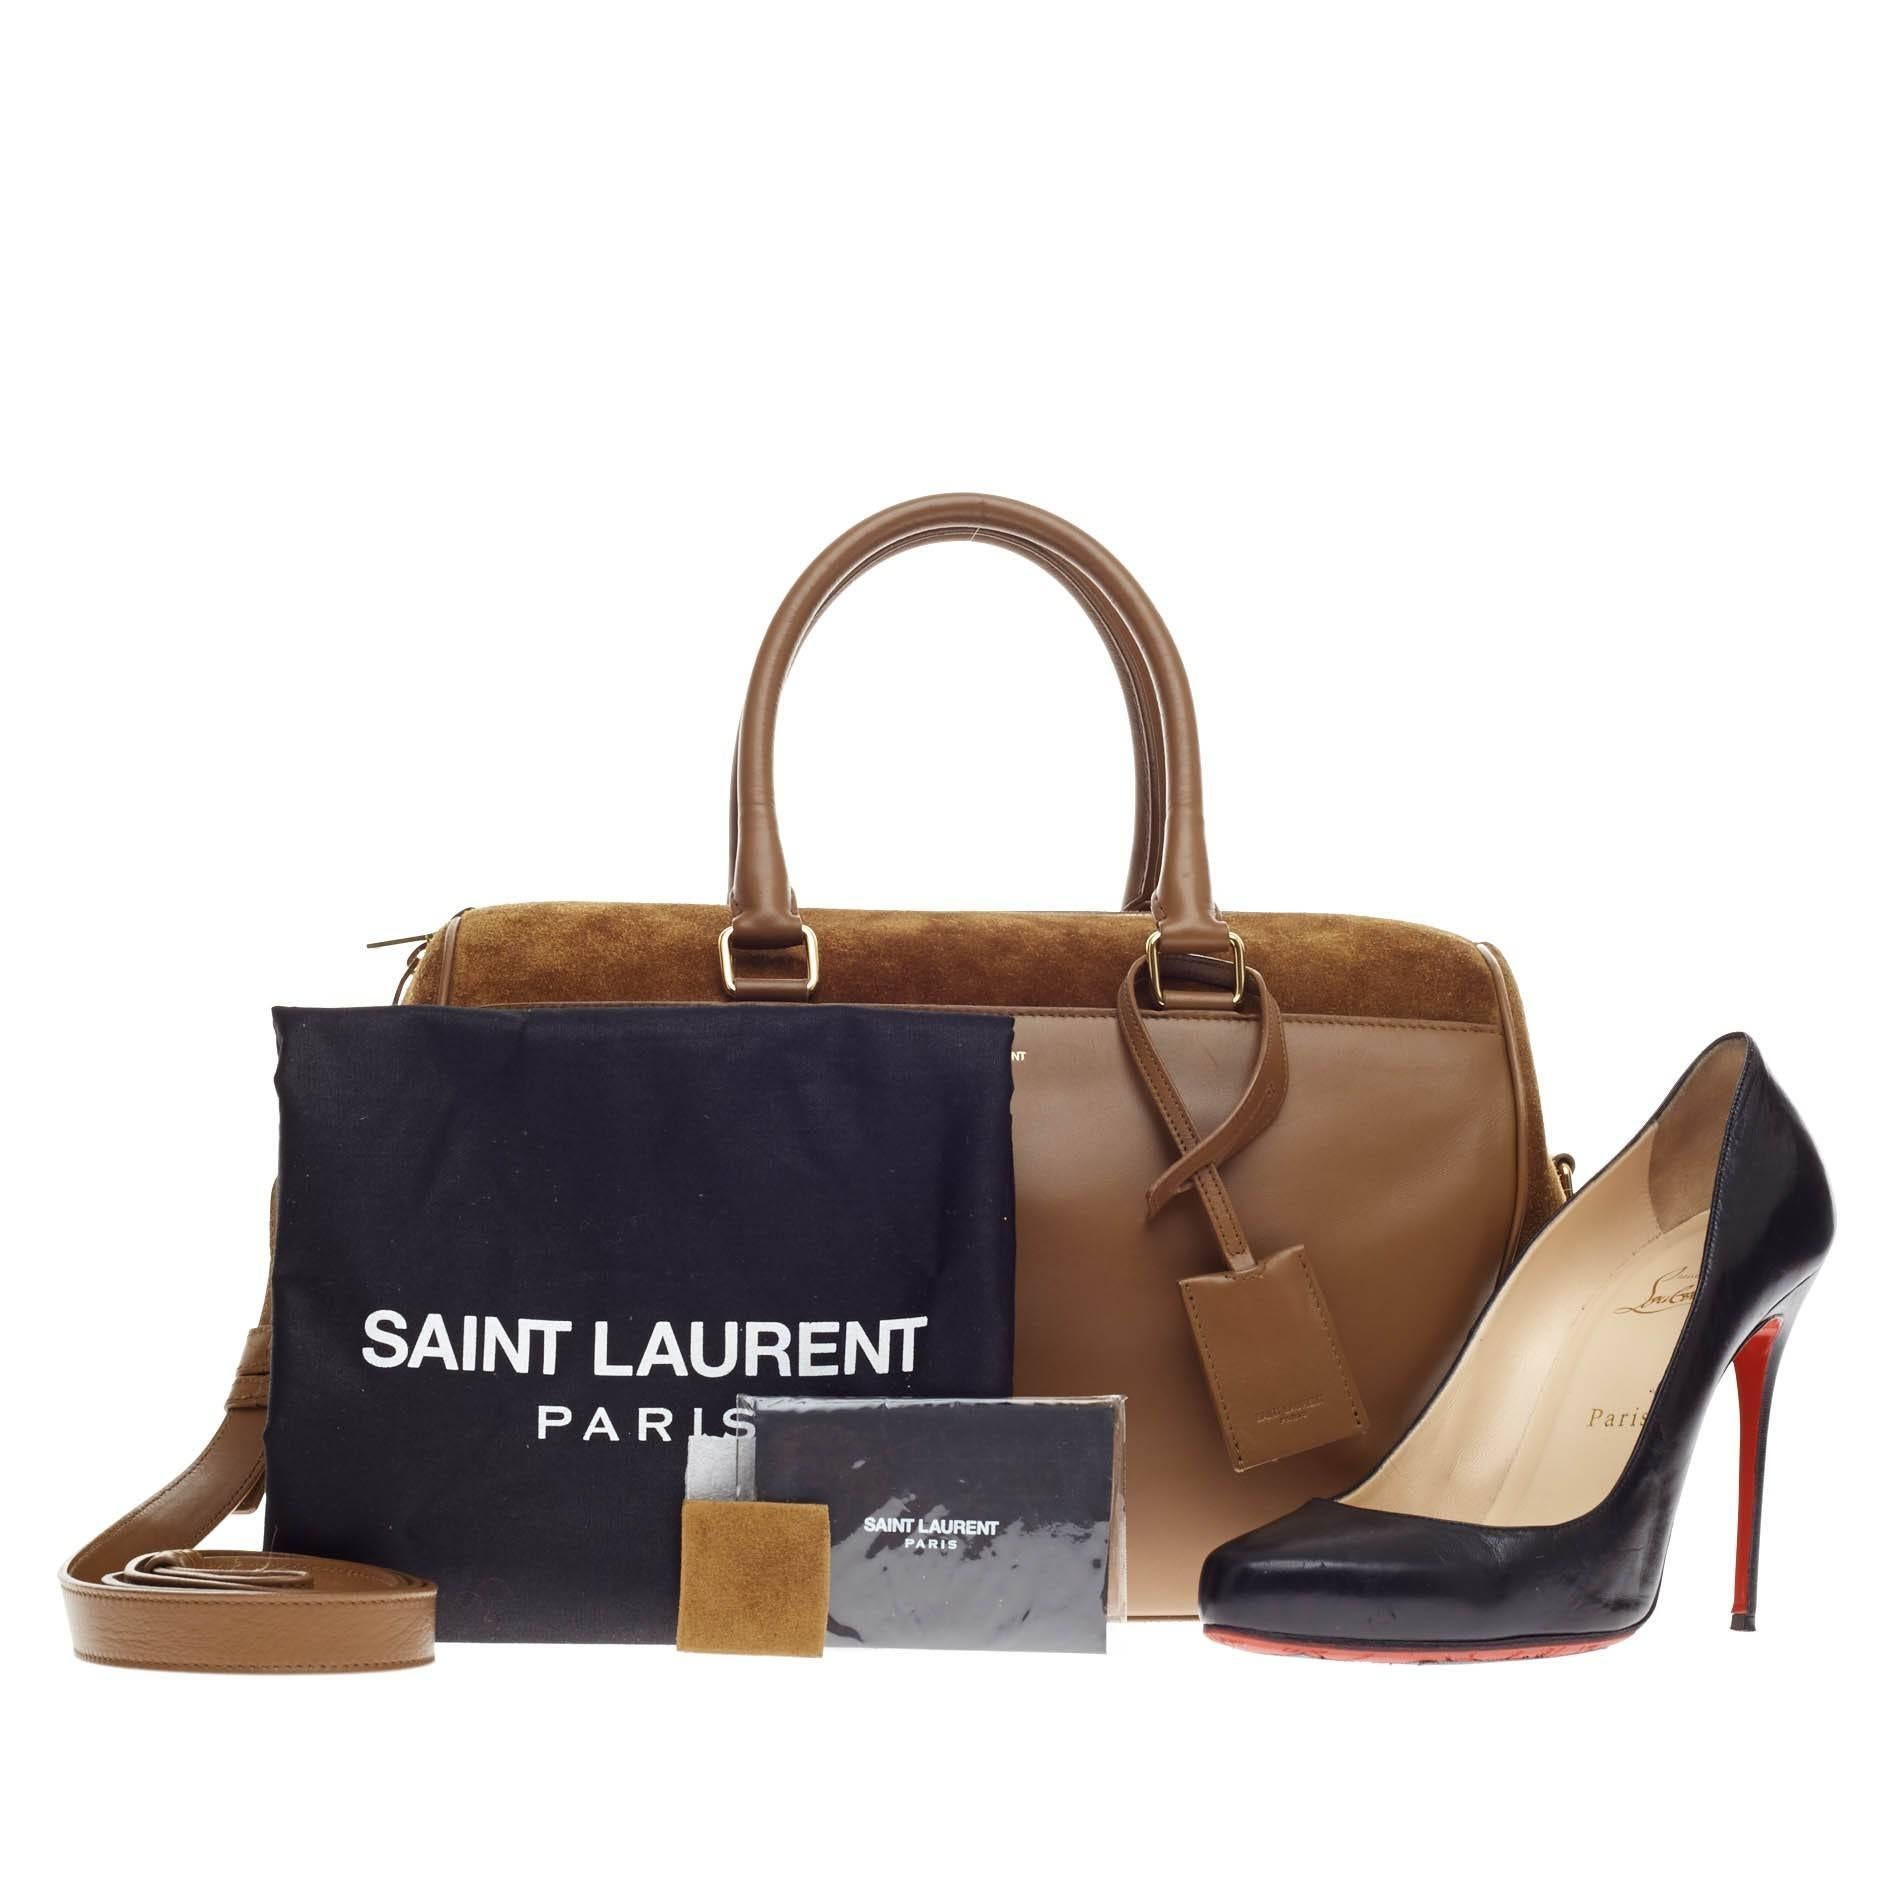 This authentic Saint Laurent Classic Duffle Suede and Leather 6 is a modern and elegant duffle bag to travel in style with. Crafted in contrasting suede and leather in beautiful ochre brown, this alluring bag features dual-rolled leather handles,